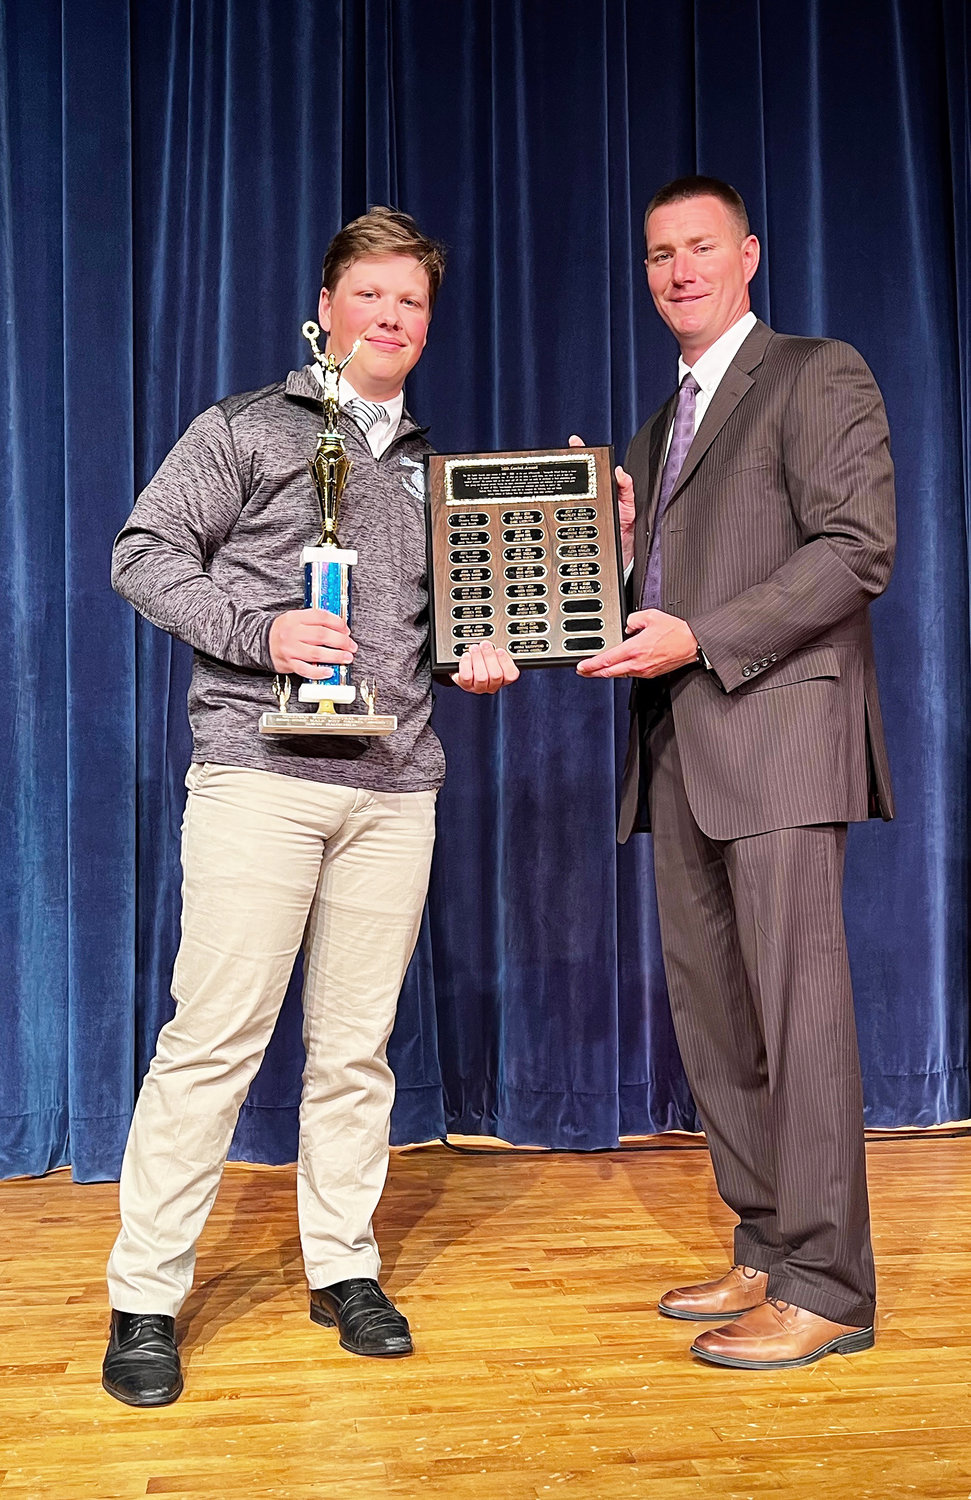 Gavin Hauschild was the Male Milt Gaebel Award winner. He is pictured with Athletic Director David Eggleton.